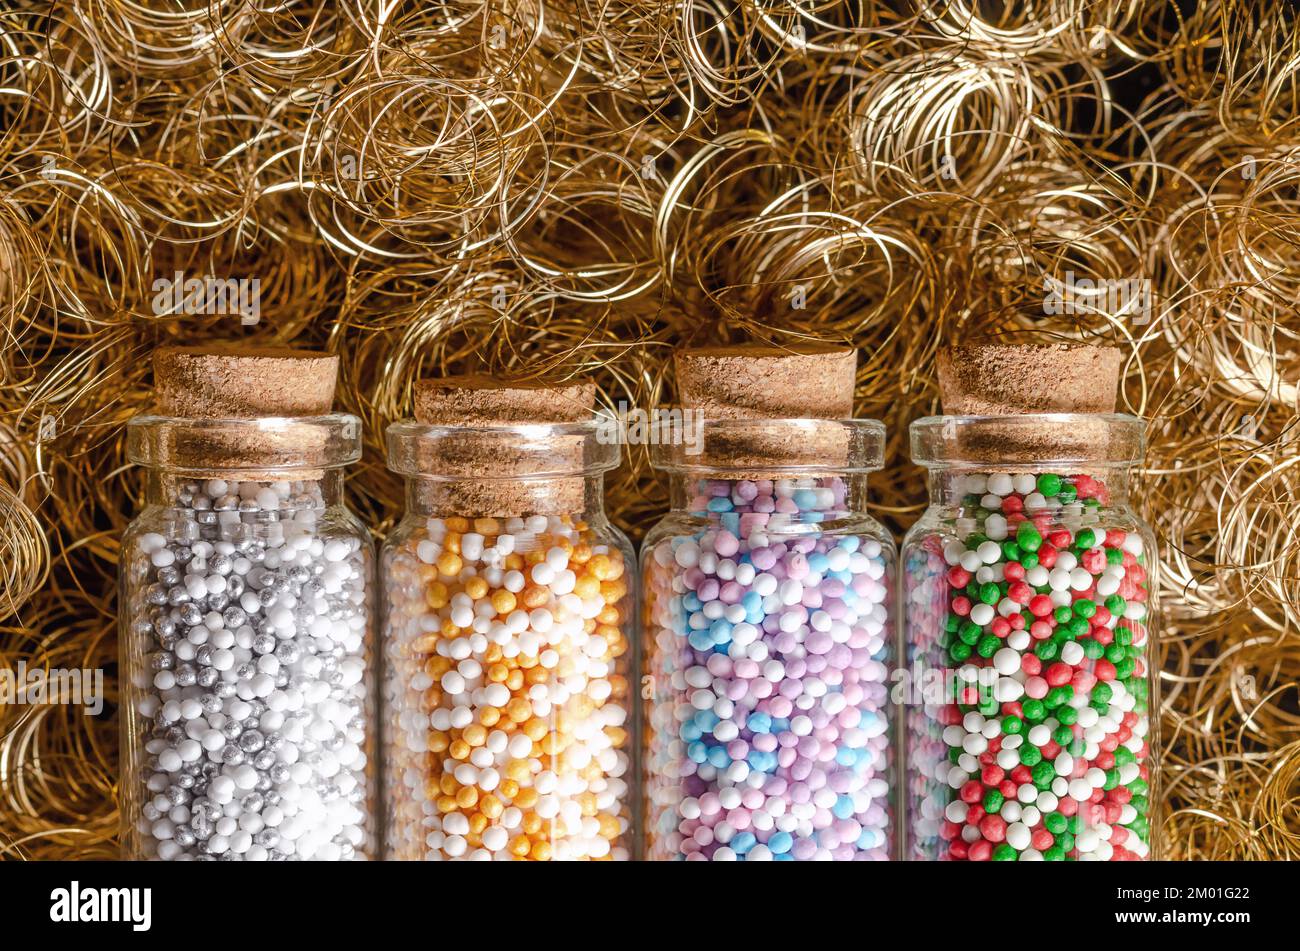 Nonpareils in small glass bottles, over golden angel hair. Winter and christmas colored mixes of edible confectionery of tiny sugar balls. Stock Photo